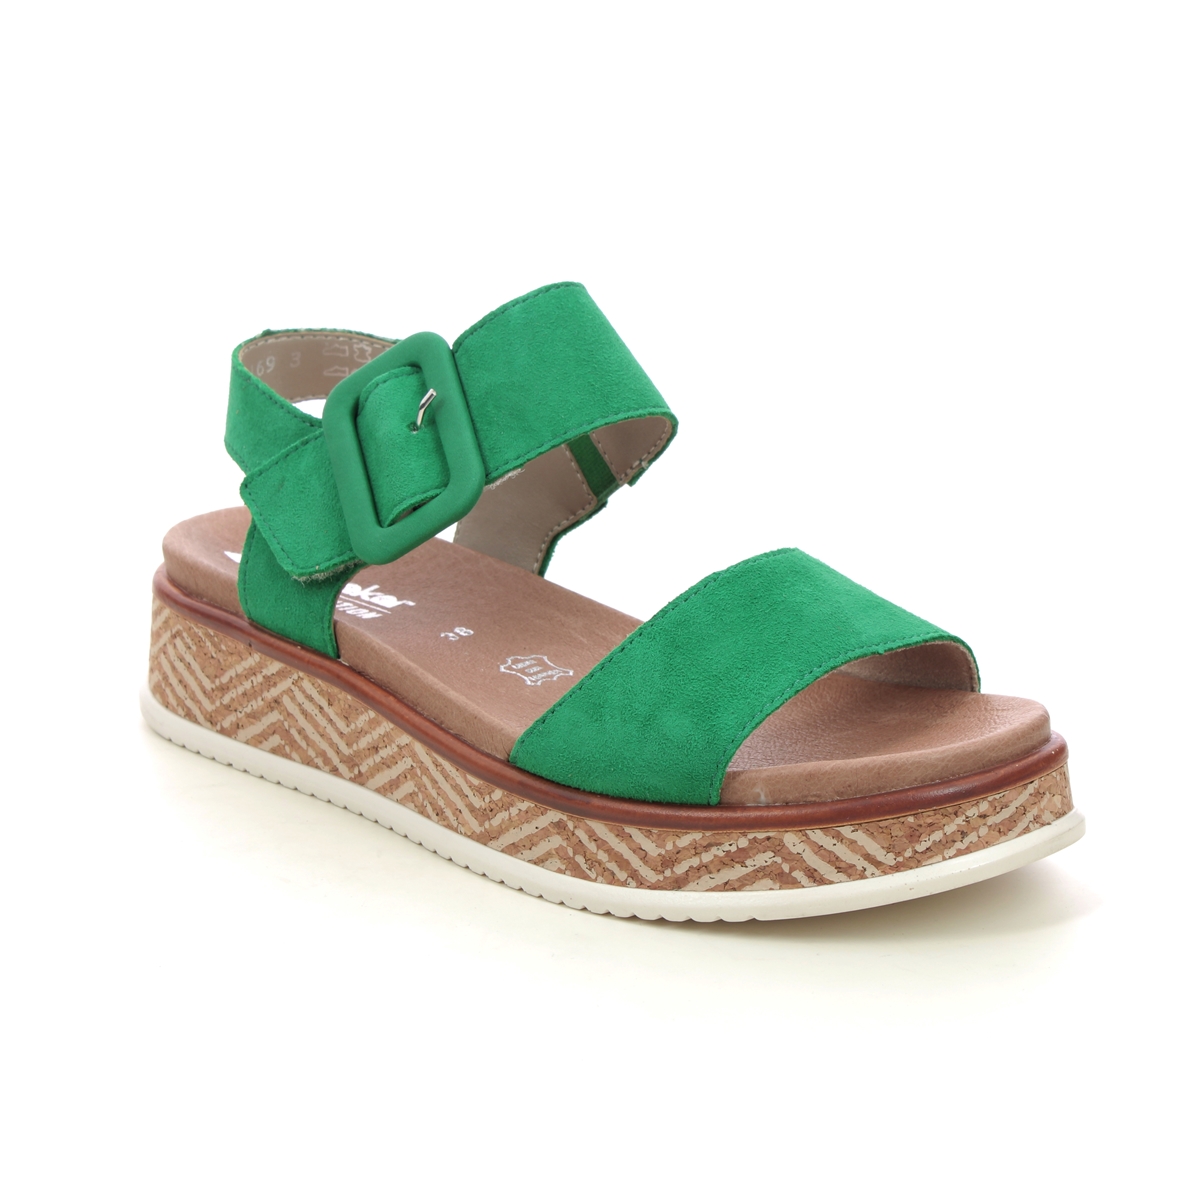 Rieker W0800-52 Green Suede Womens Flat Sandals in a Plain Leather in Size 37